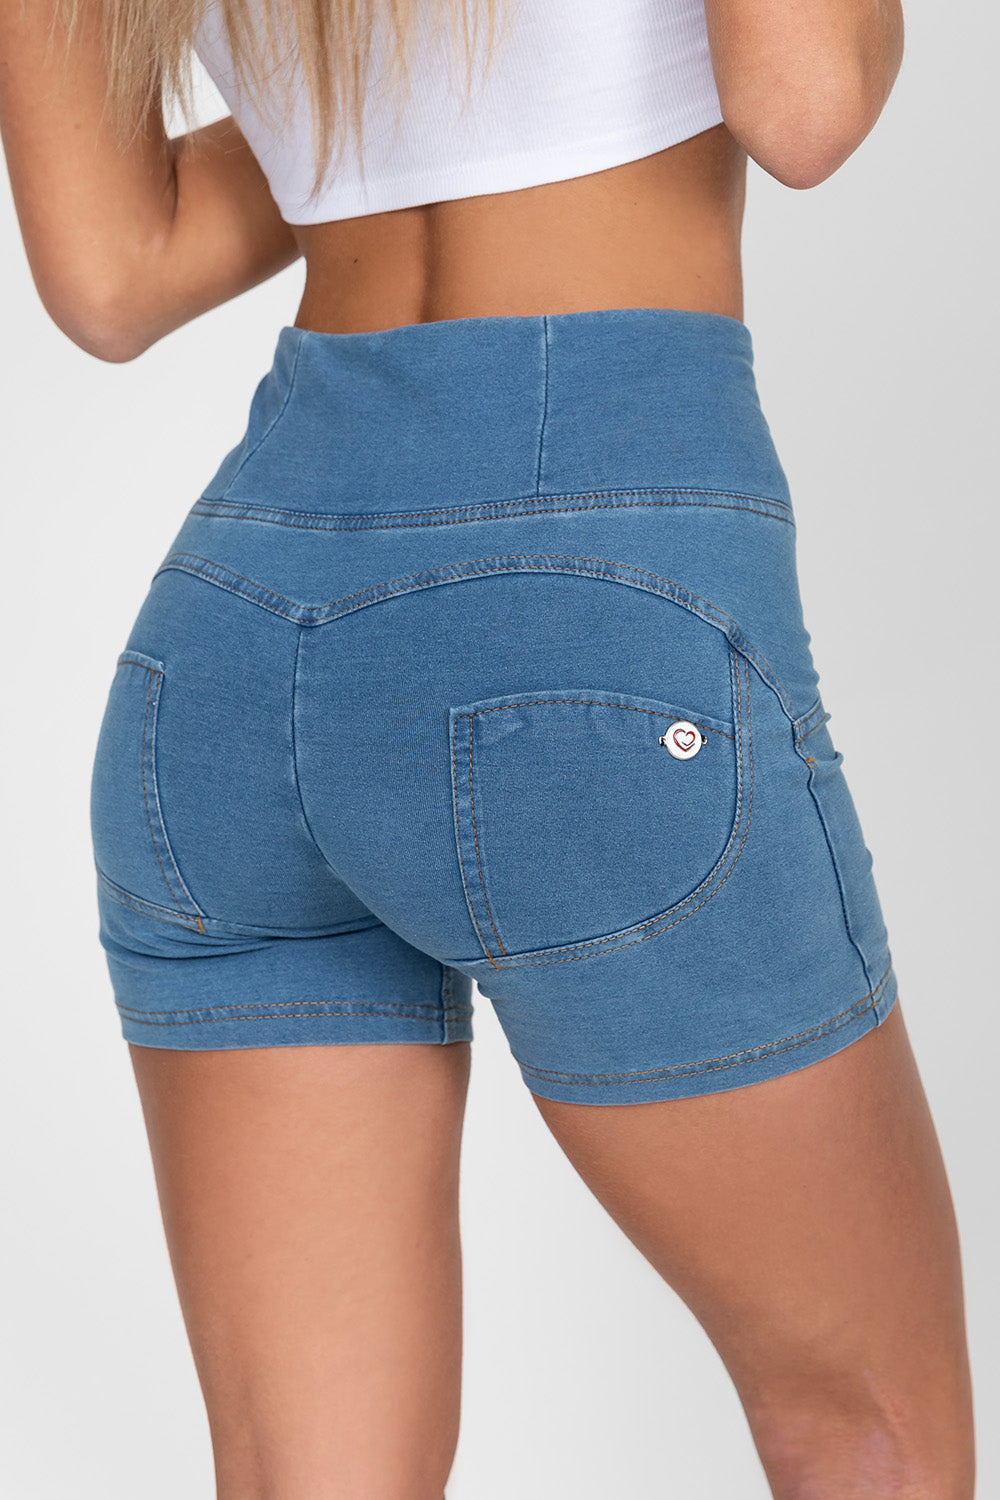 bum shaping jeans